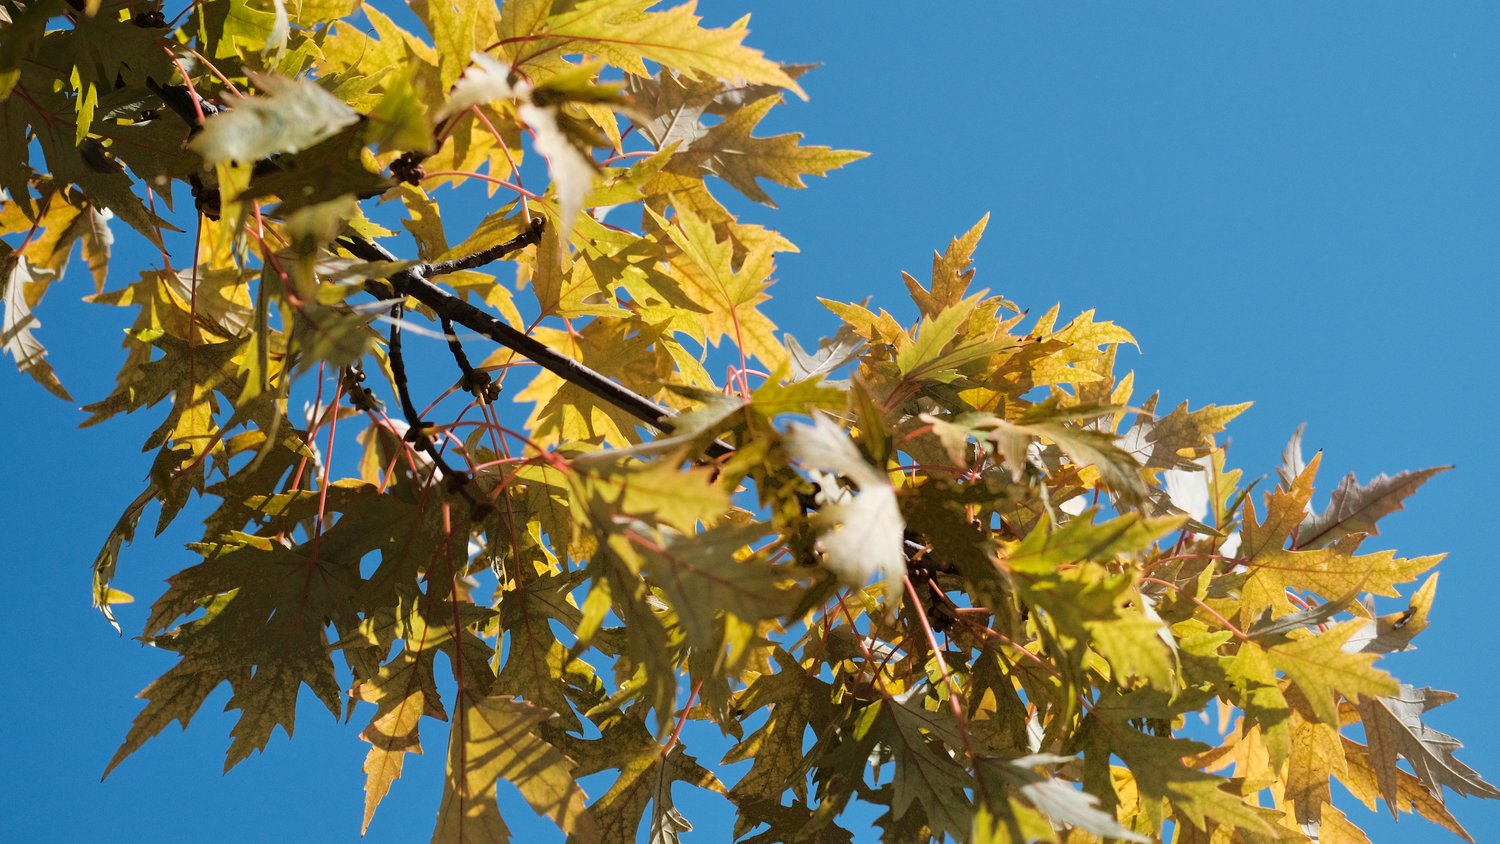 Yellow leaves against a blue sky.